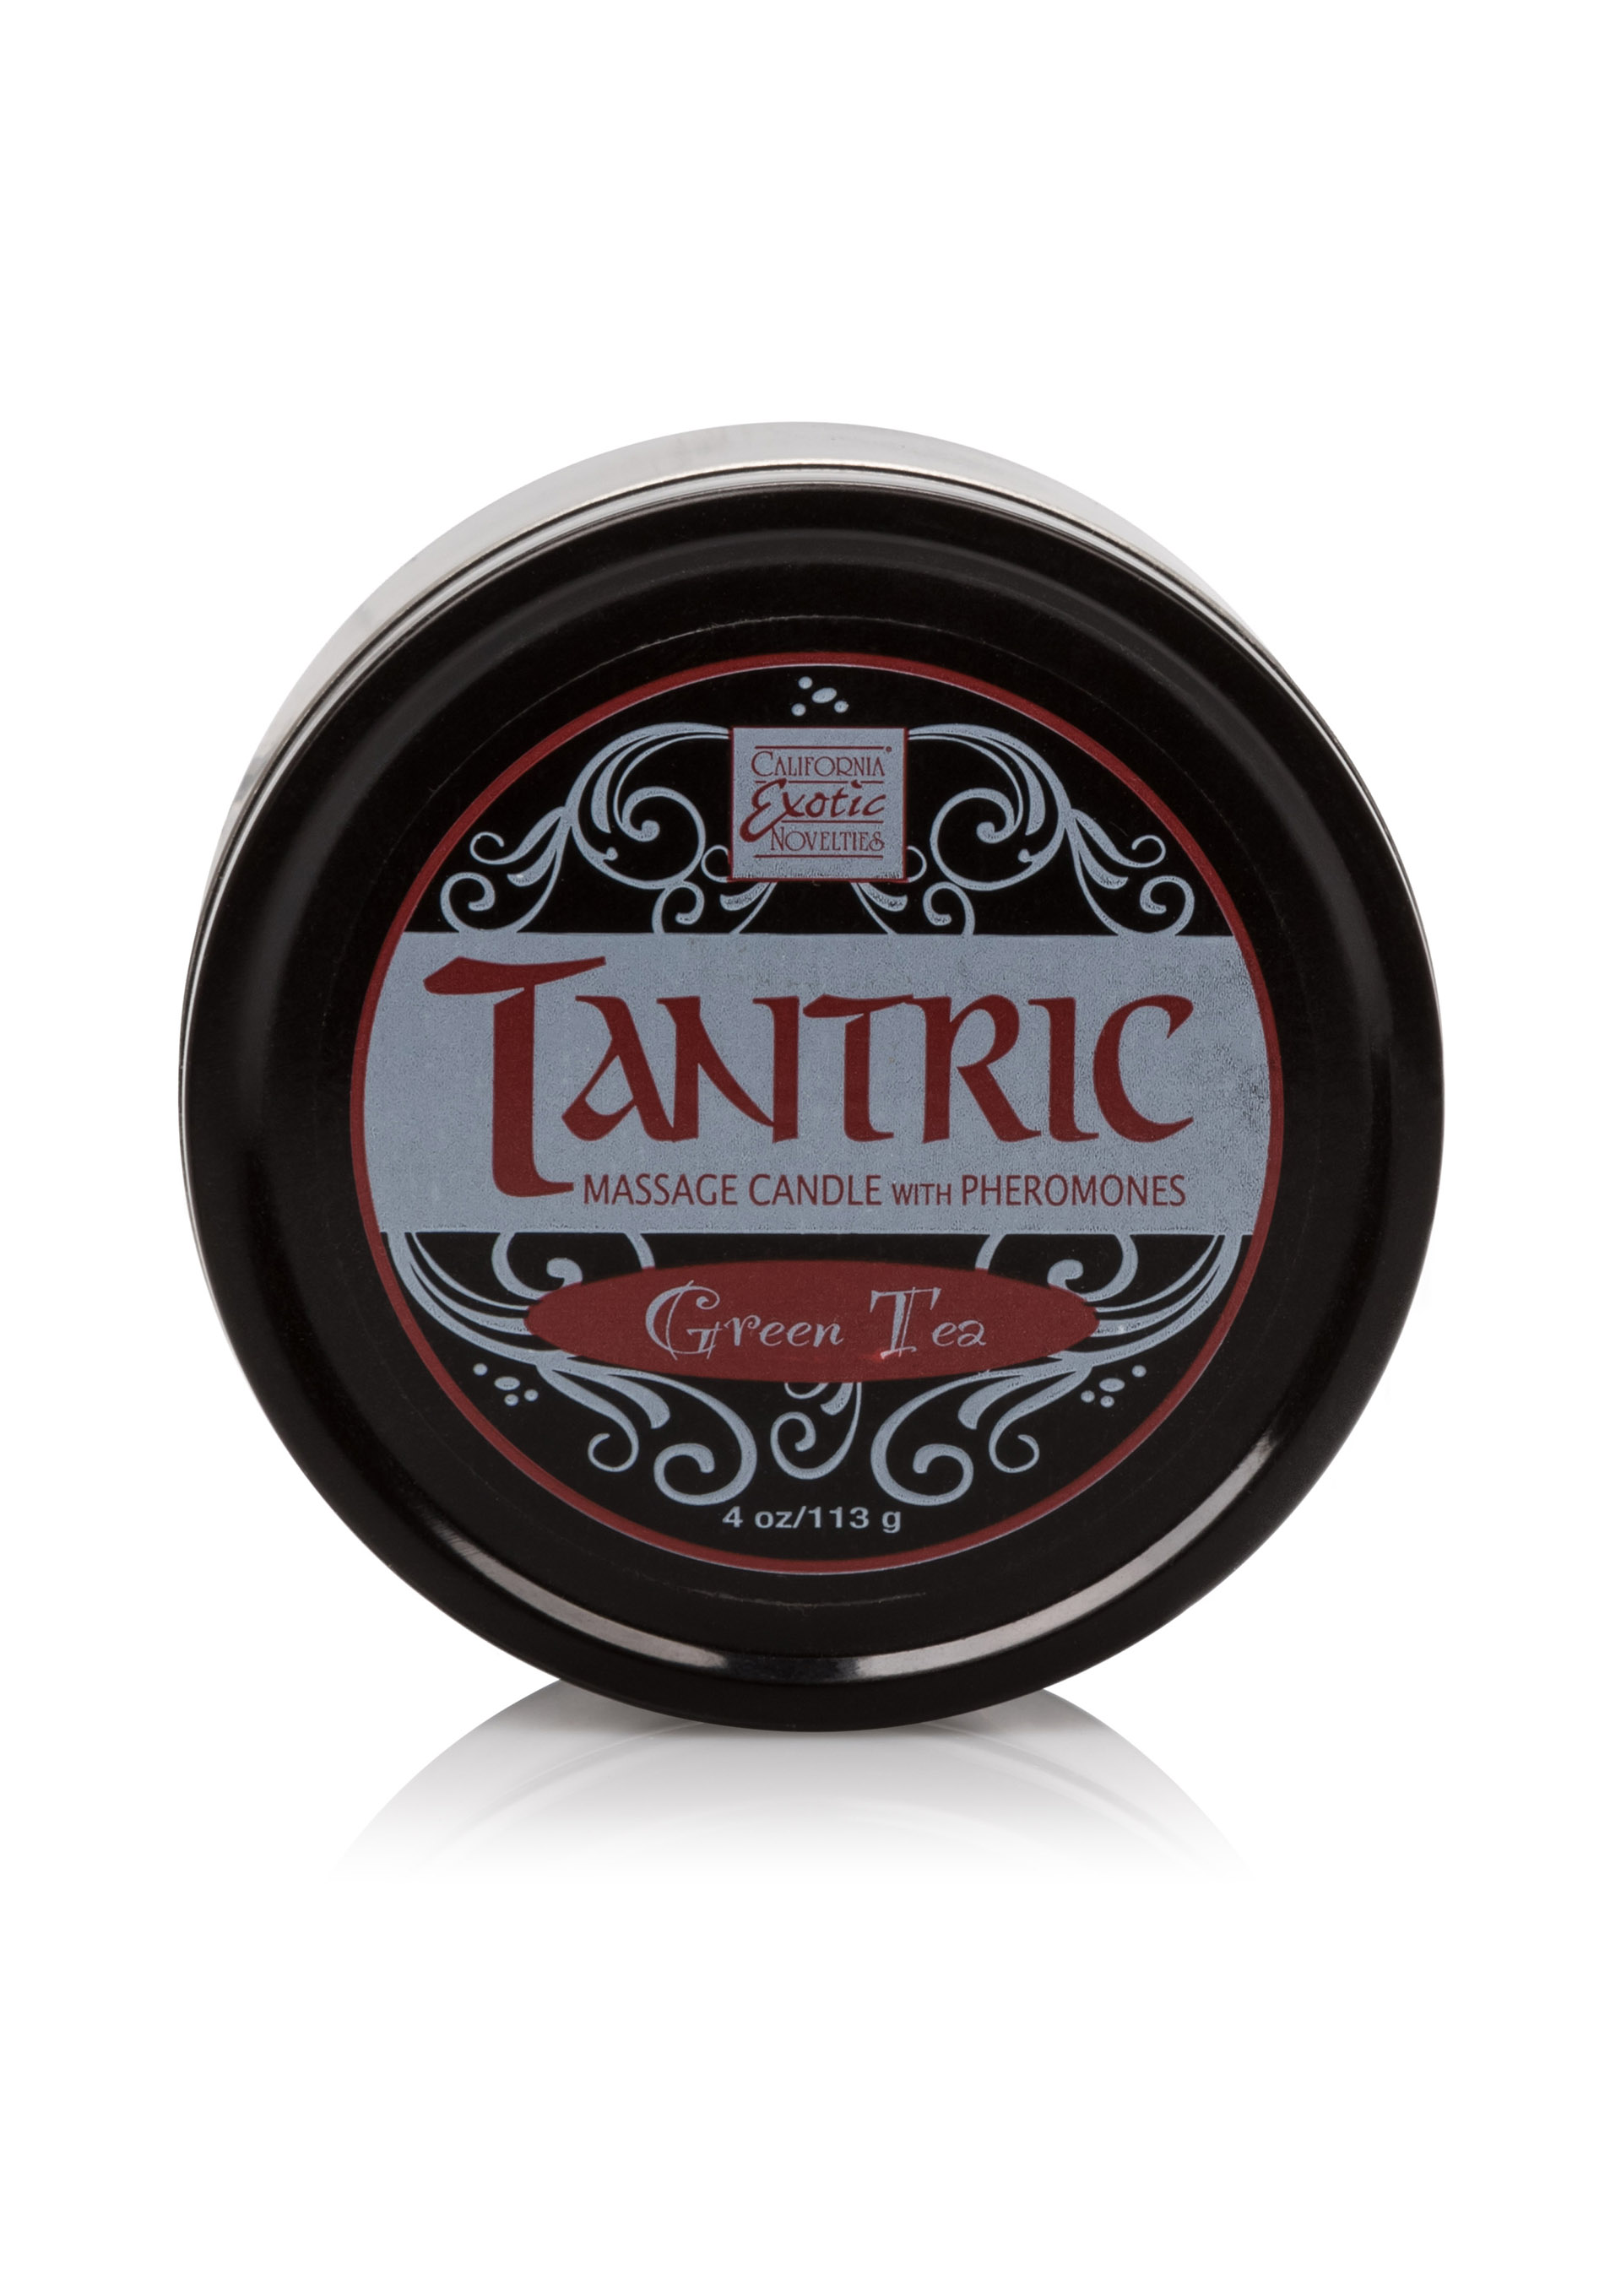 Tantric Massage Candle with Pheromones.